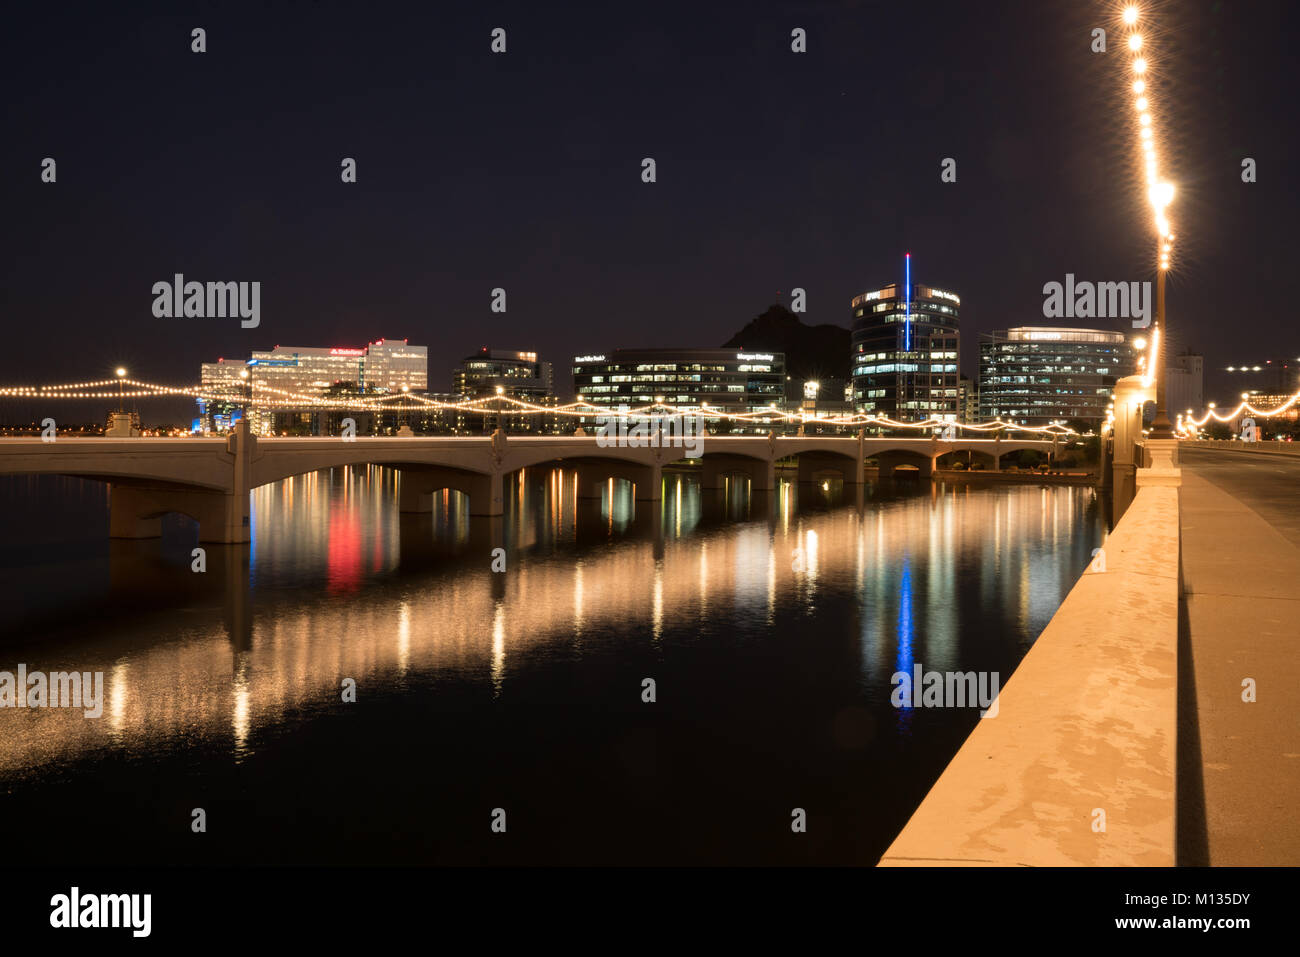 TEMPE, AZ - OCTOBER 25, 2017: The city skyline of Tempe, Arizona at night from across the Salt River at Tempe Town Lake Stock Photo